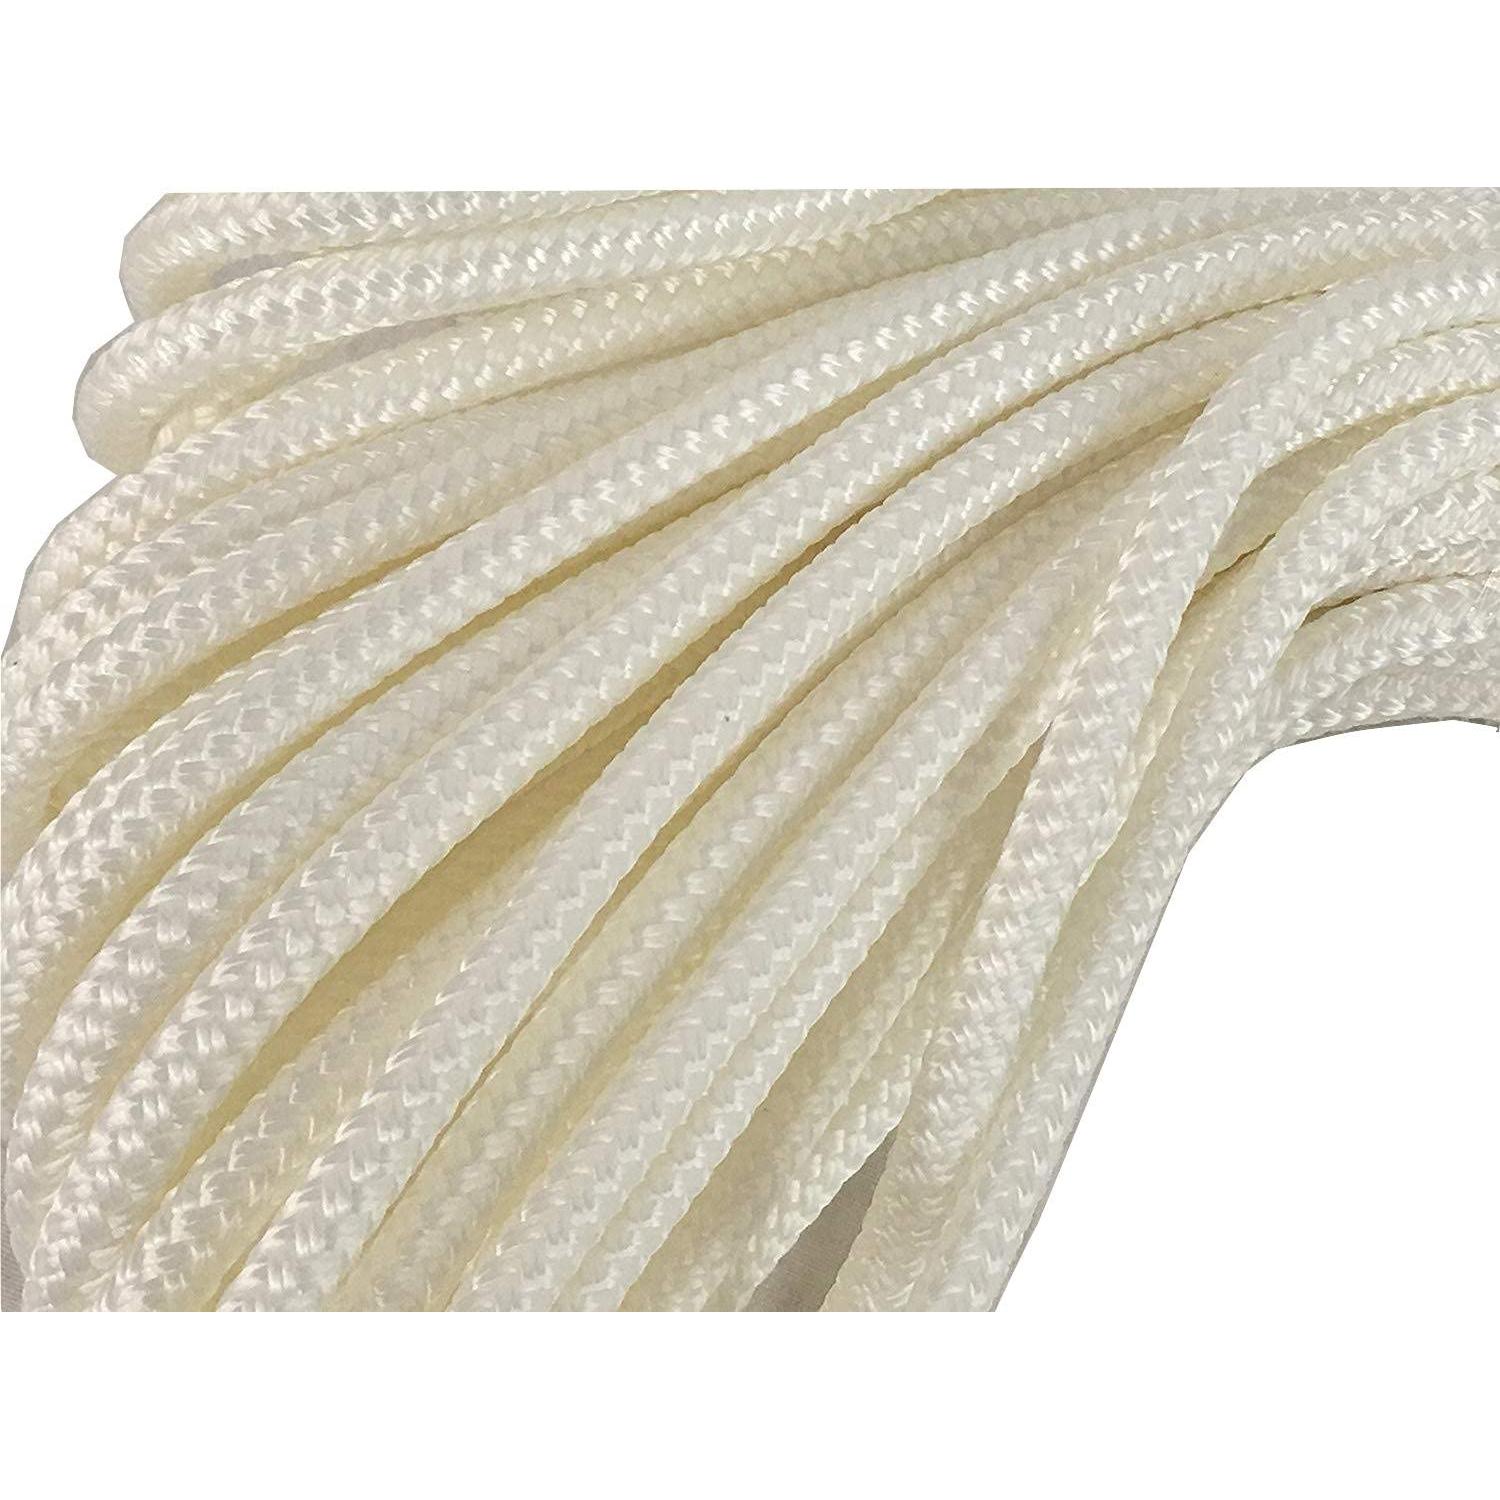 Rope Polyester Braid 𝑝/𝑚eter-Archies Hardware-diyshop.co.za